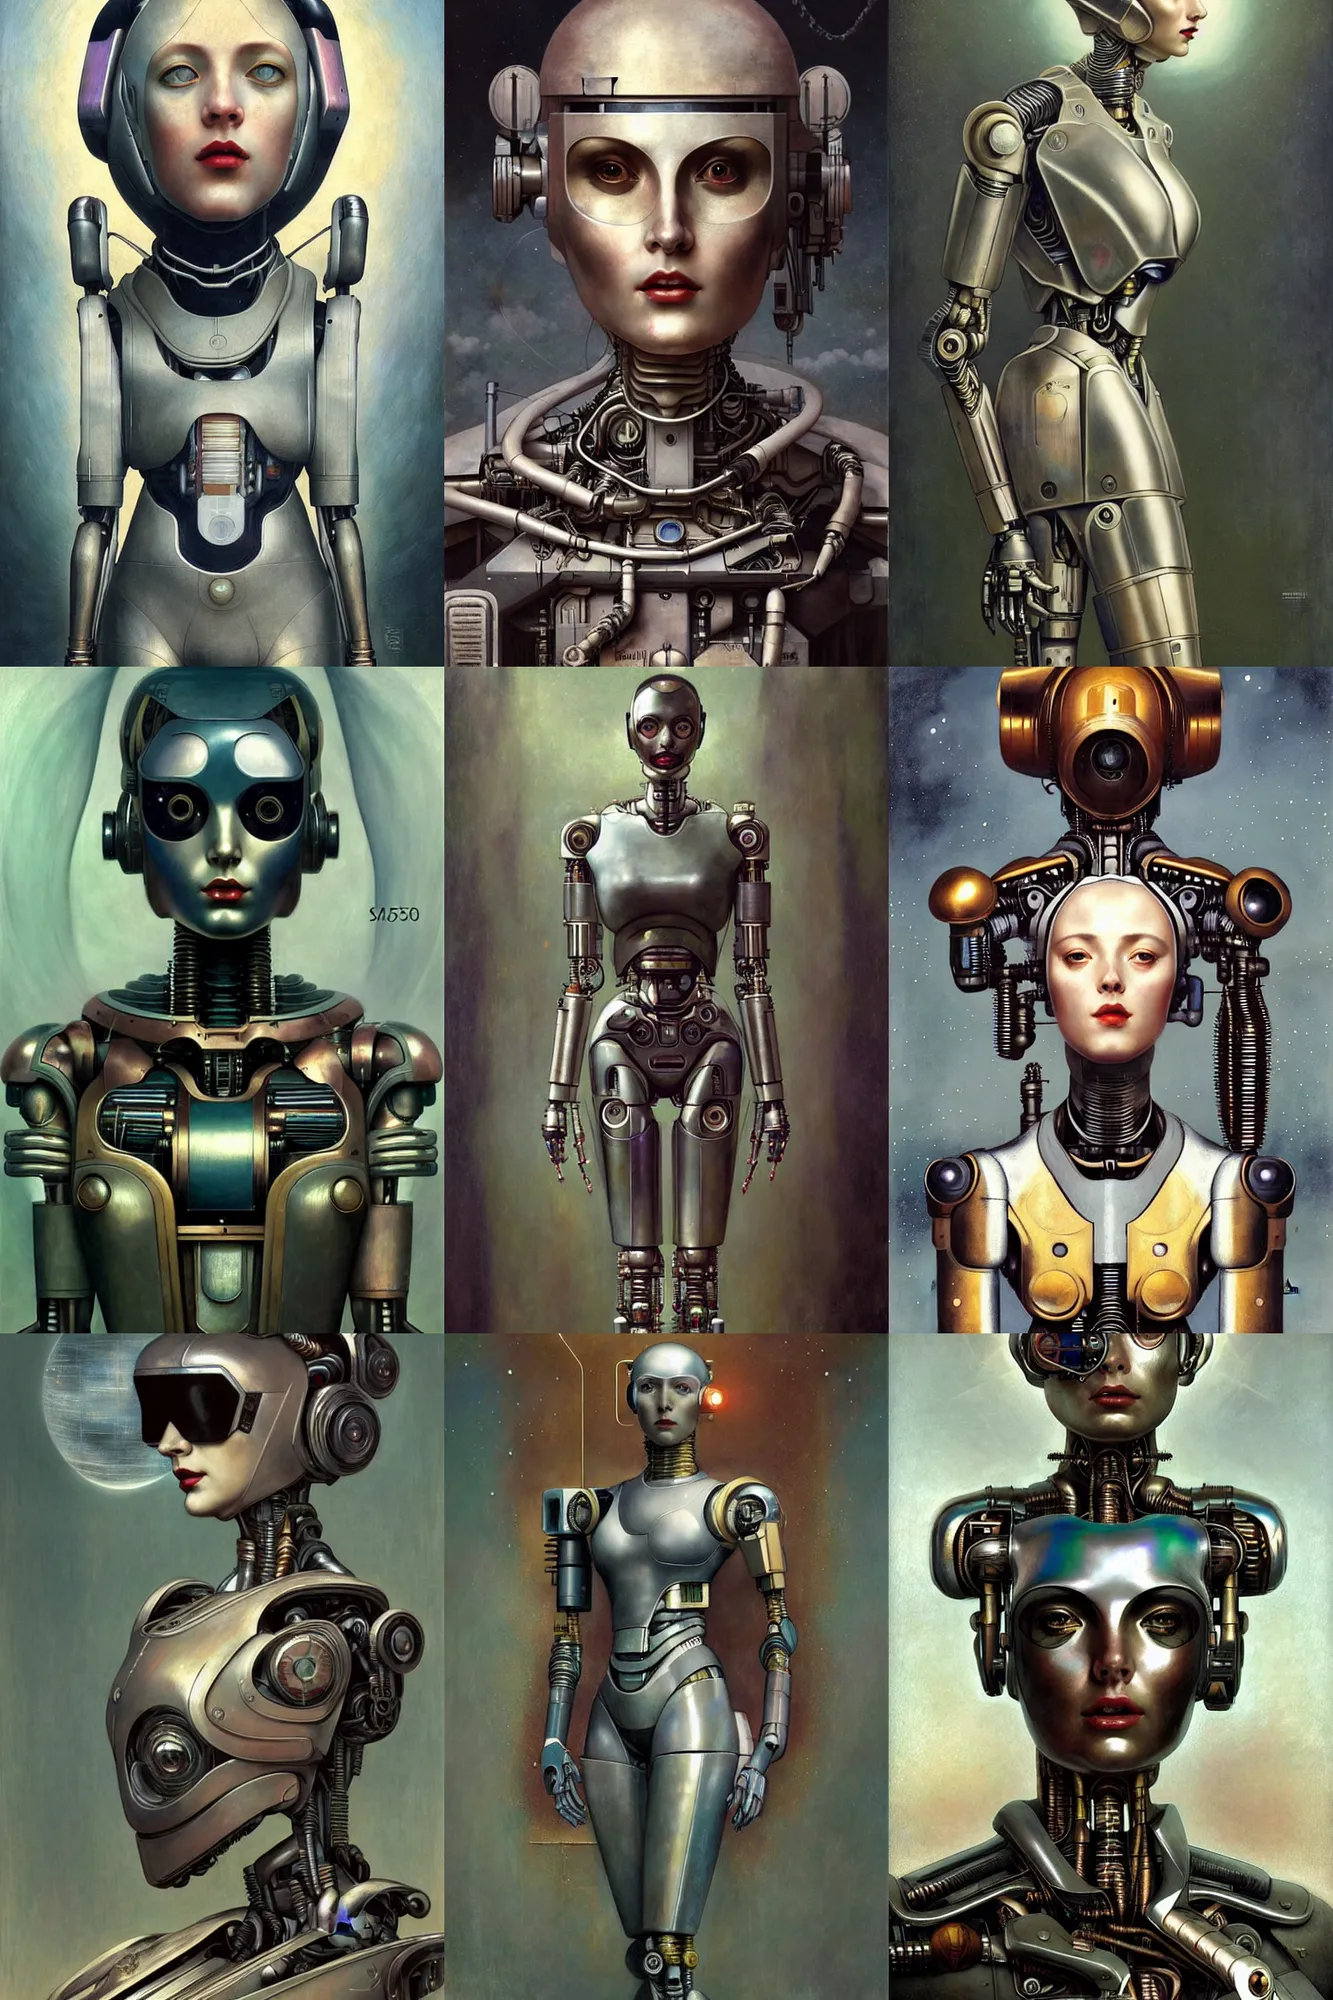 Prompt: fullbody and portrait futurist cyborg empress, perfect future, award winning art by santiago caruso, iridescent color palette, beautiful face, by wlop and karol bak and bouguereau and viktoria gavrilenko, 1 9 5 0 s retro future robot android. muted colors